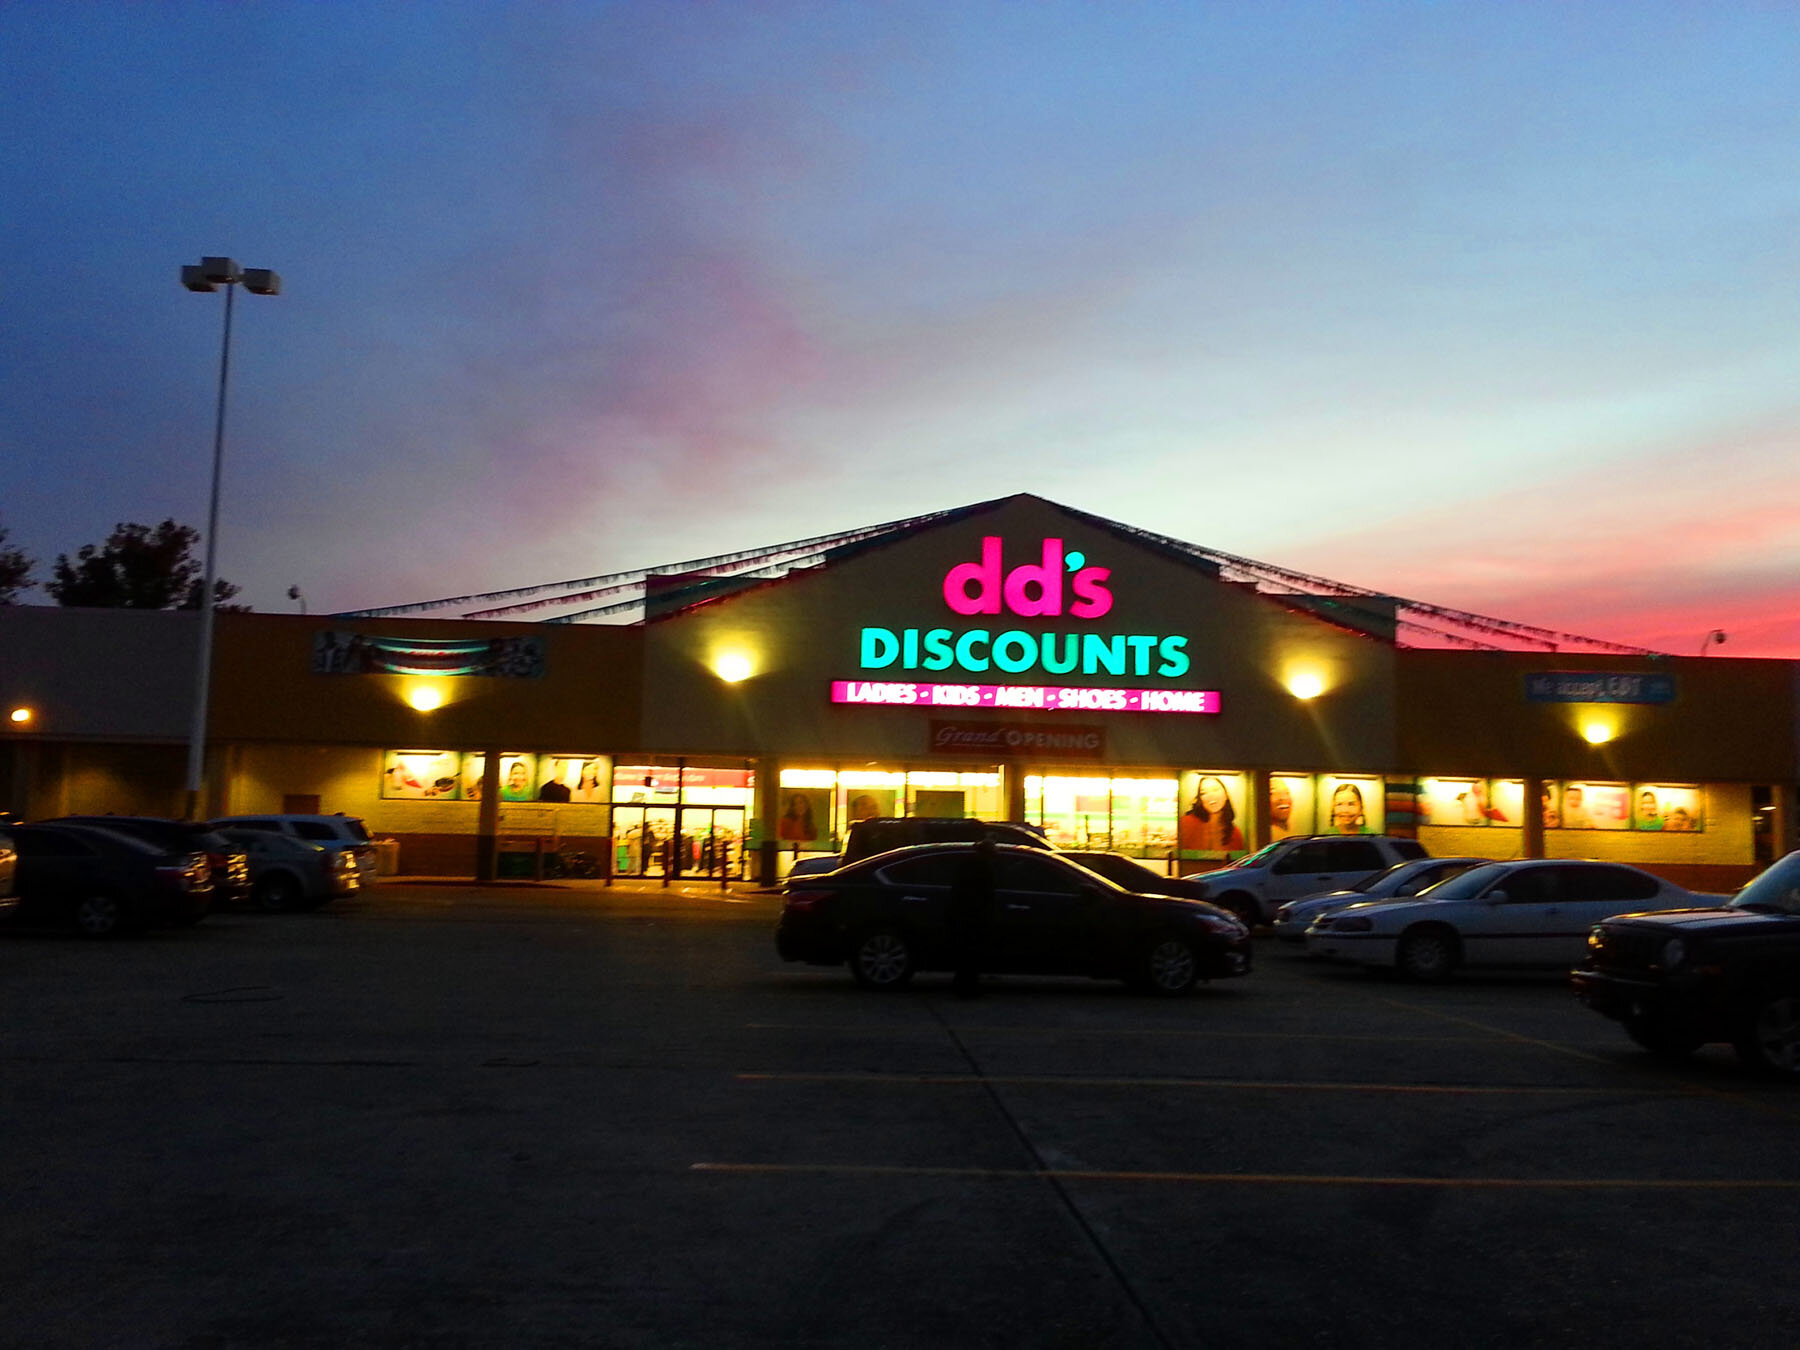 dds DISCOUNTS Channel Letters